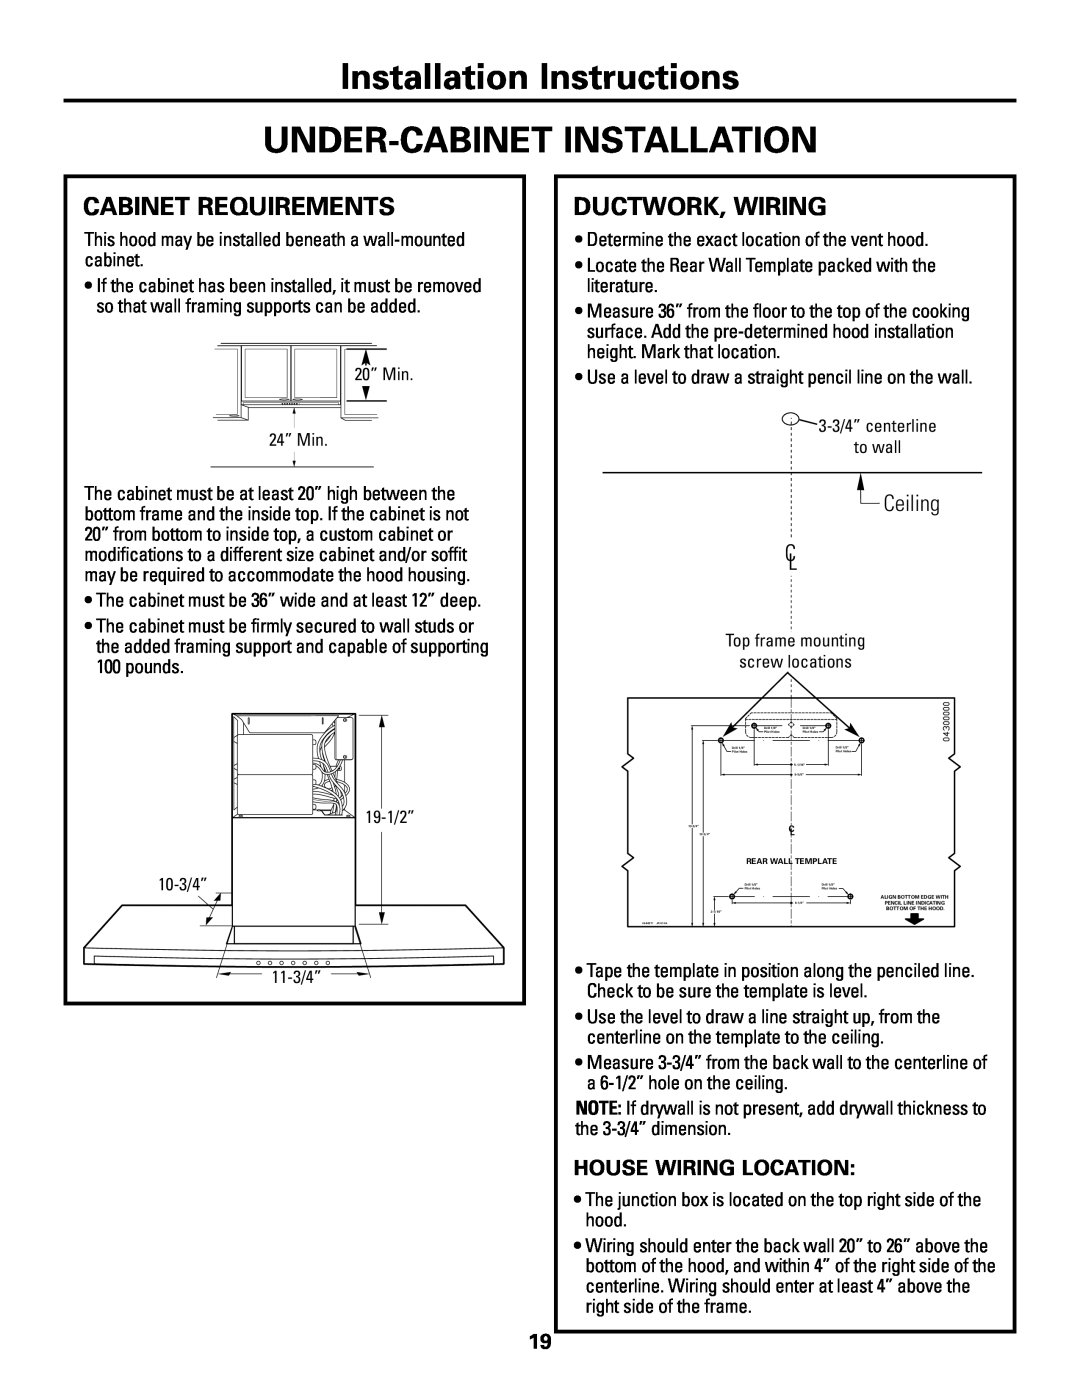 GE ZV800 Installation Instructions UNDER-CABINET INSTALLATION, Cabinet Requirements, Ductwork, Wiring, Ceiling 